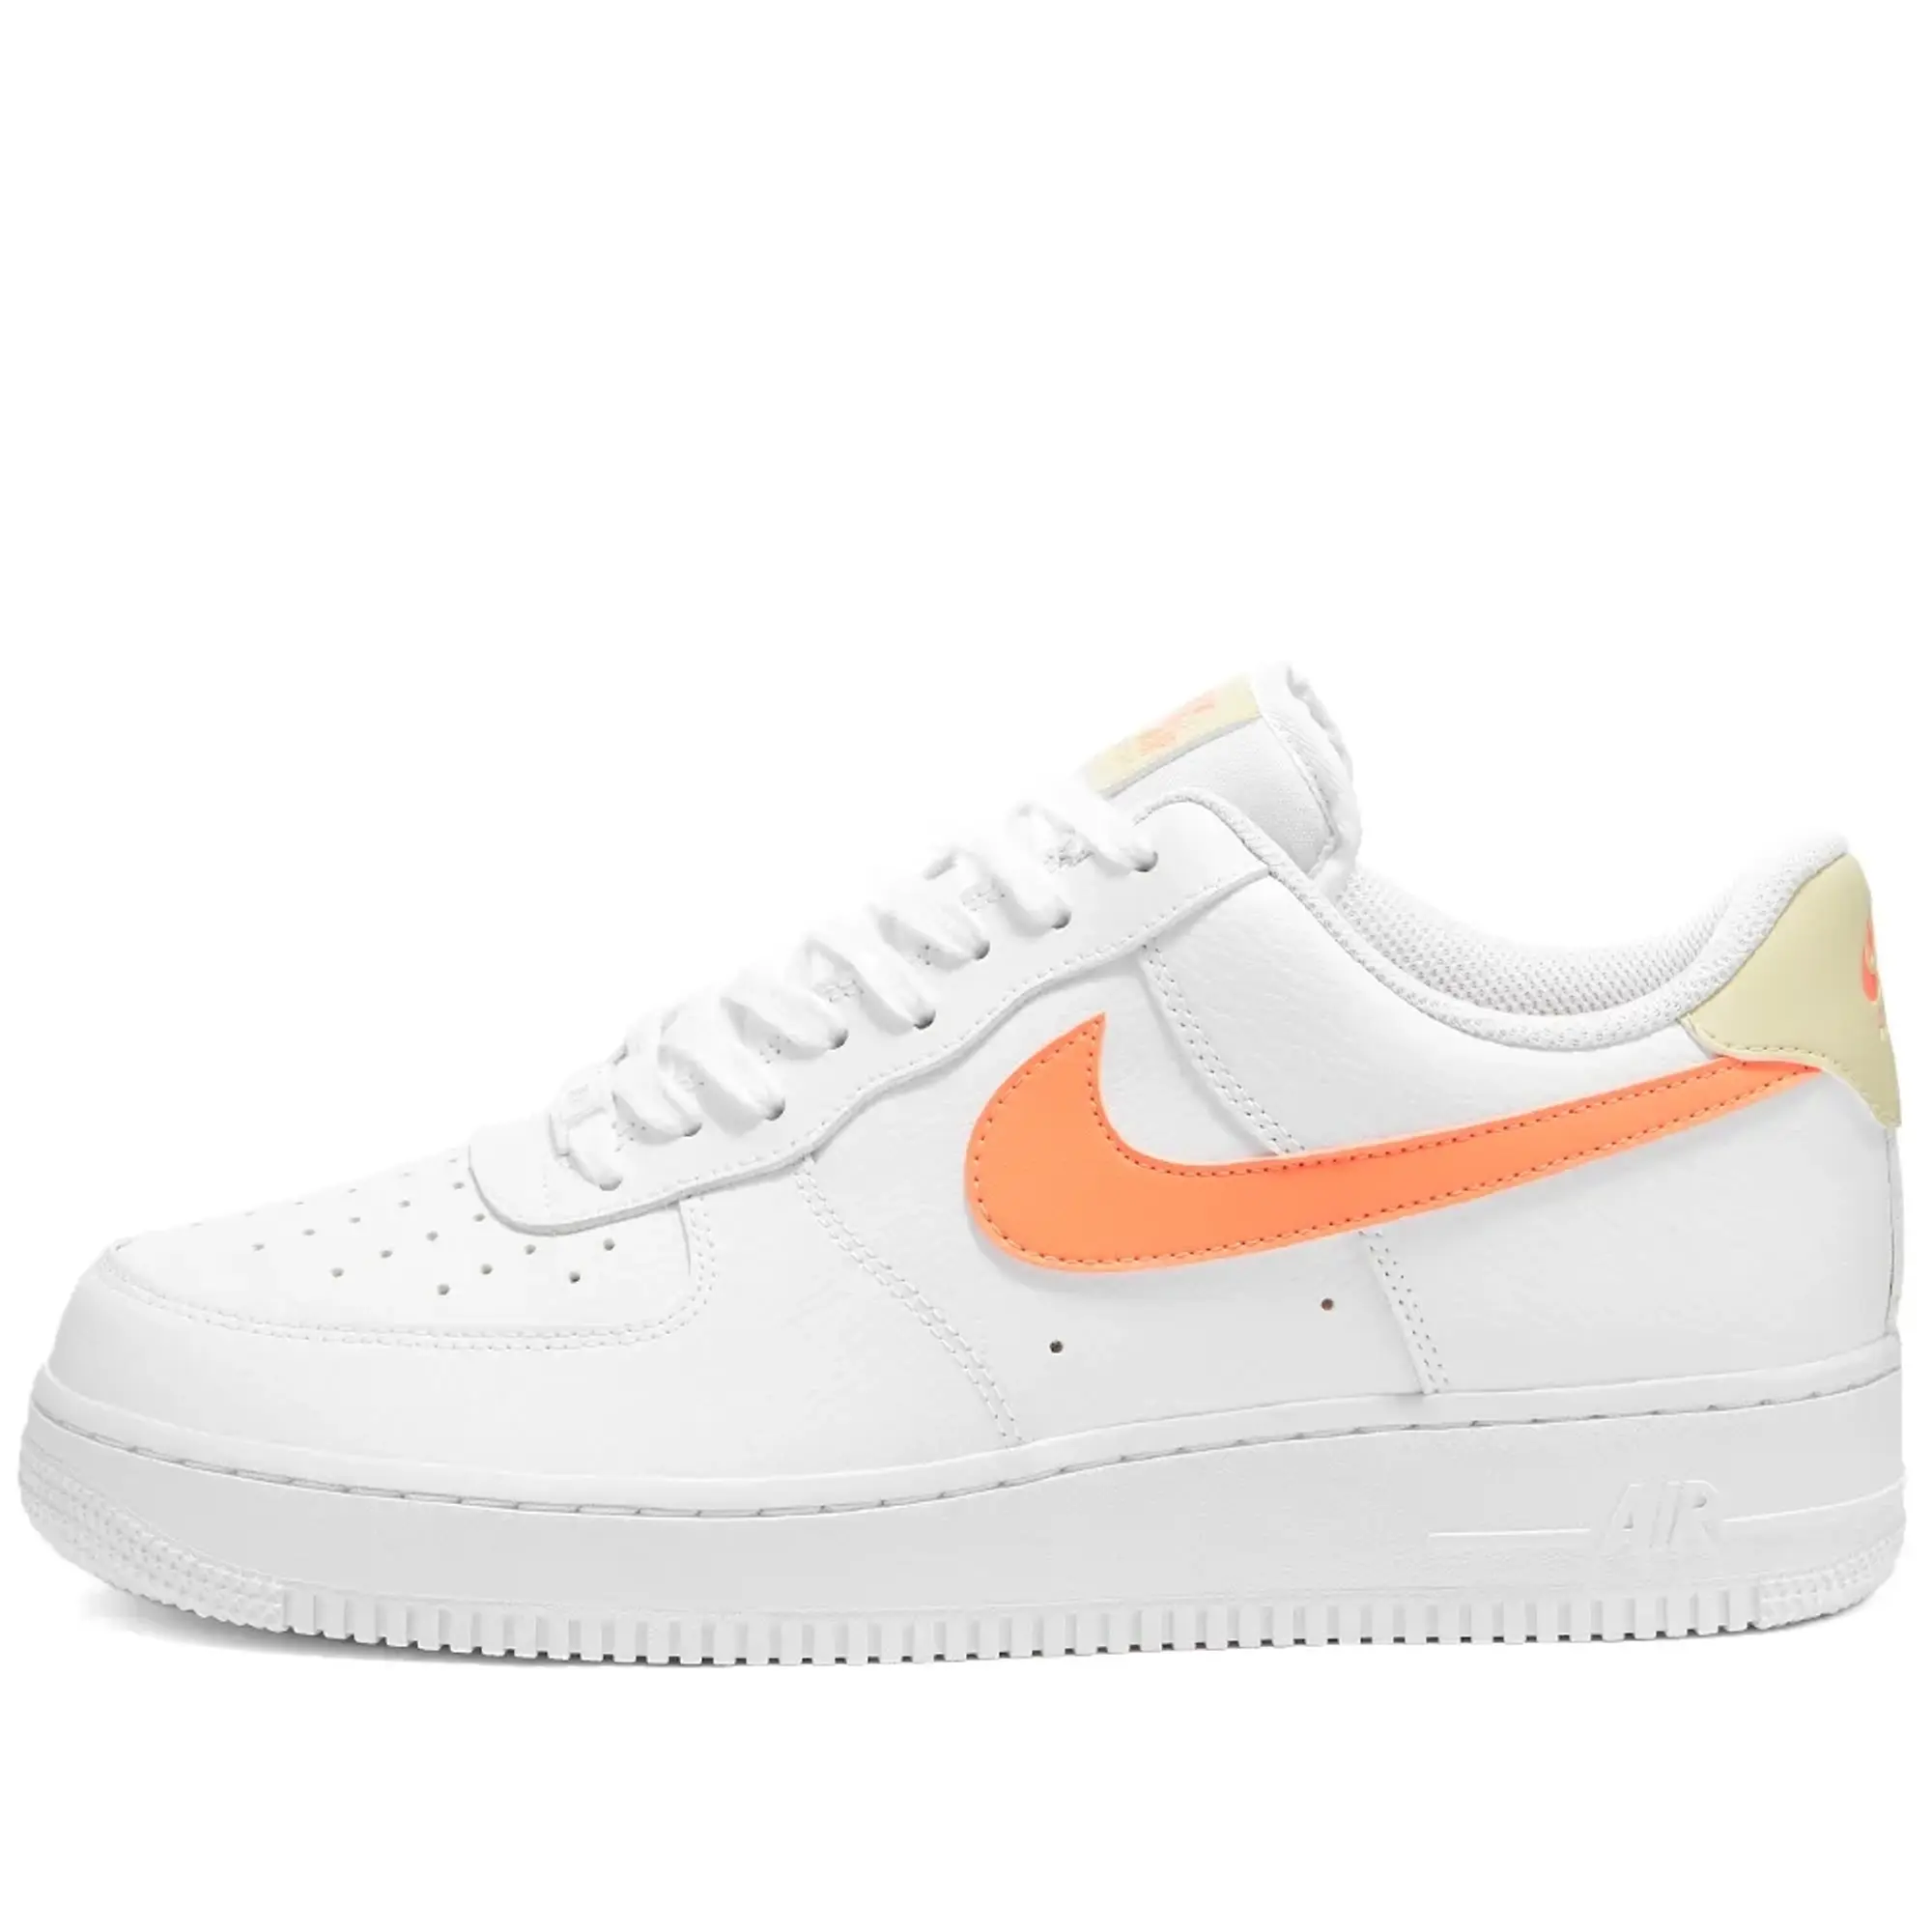 Nike Womens AIR FORCE 1 07 ATOMIC PINK Shoes